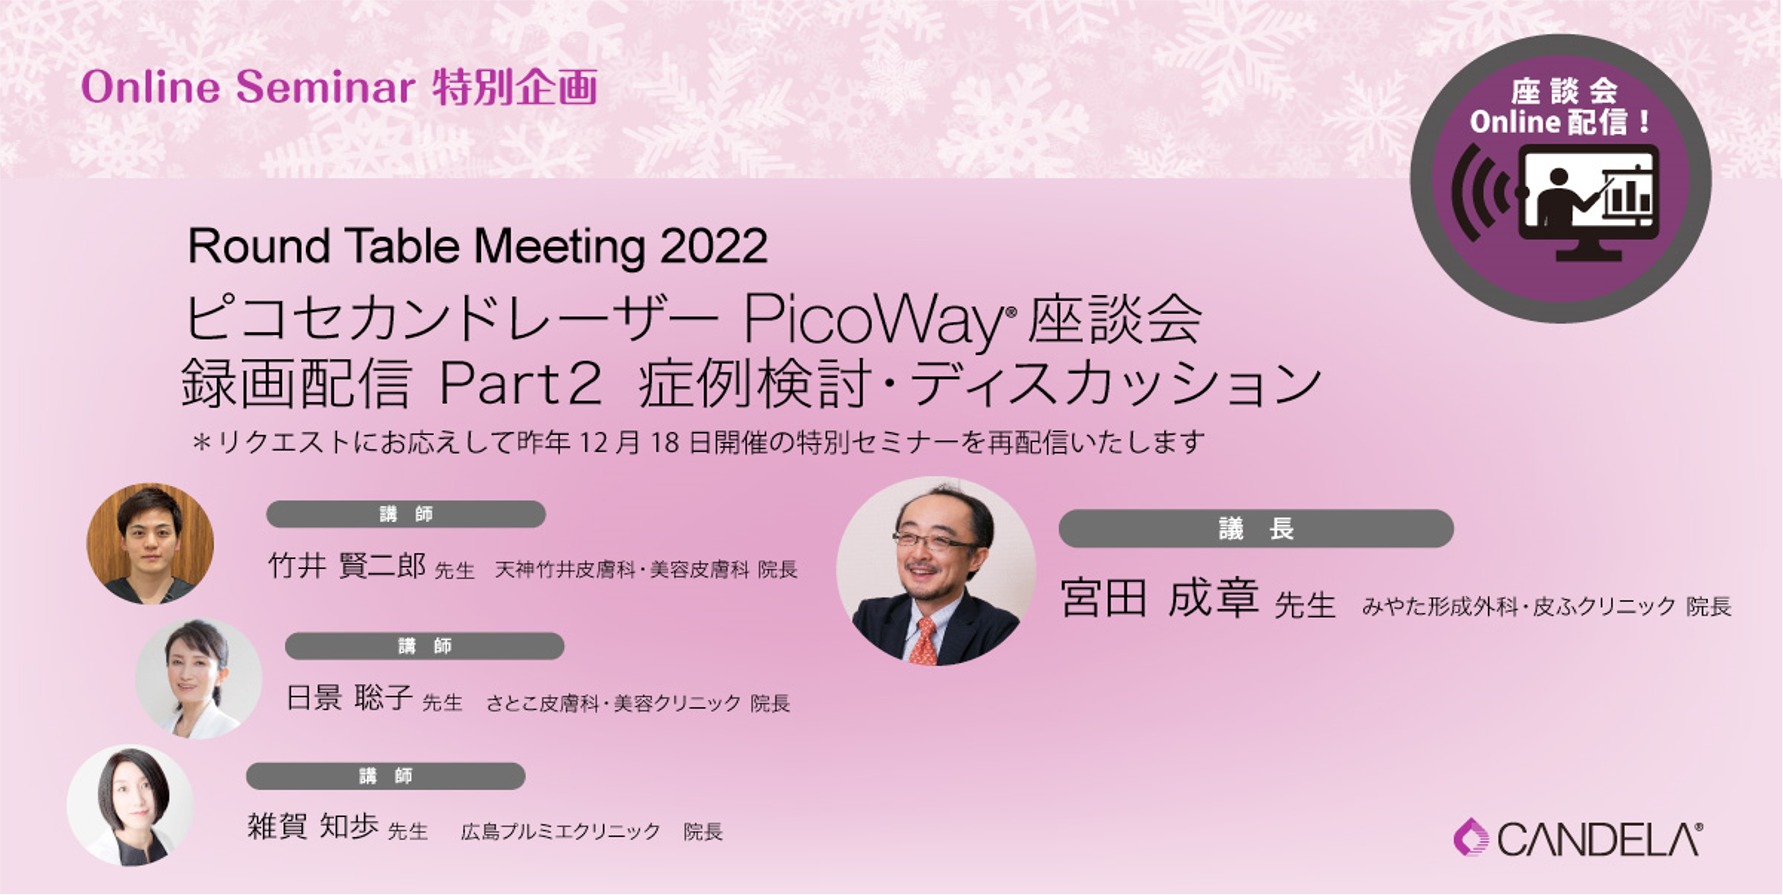 Round Table Meeting 2022 クリスマス特別企画 PicoWay 座談会録画配信 Part２ 症例検討・ディスカッション